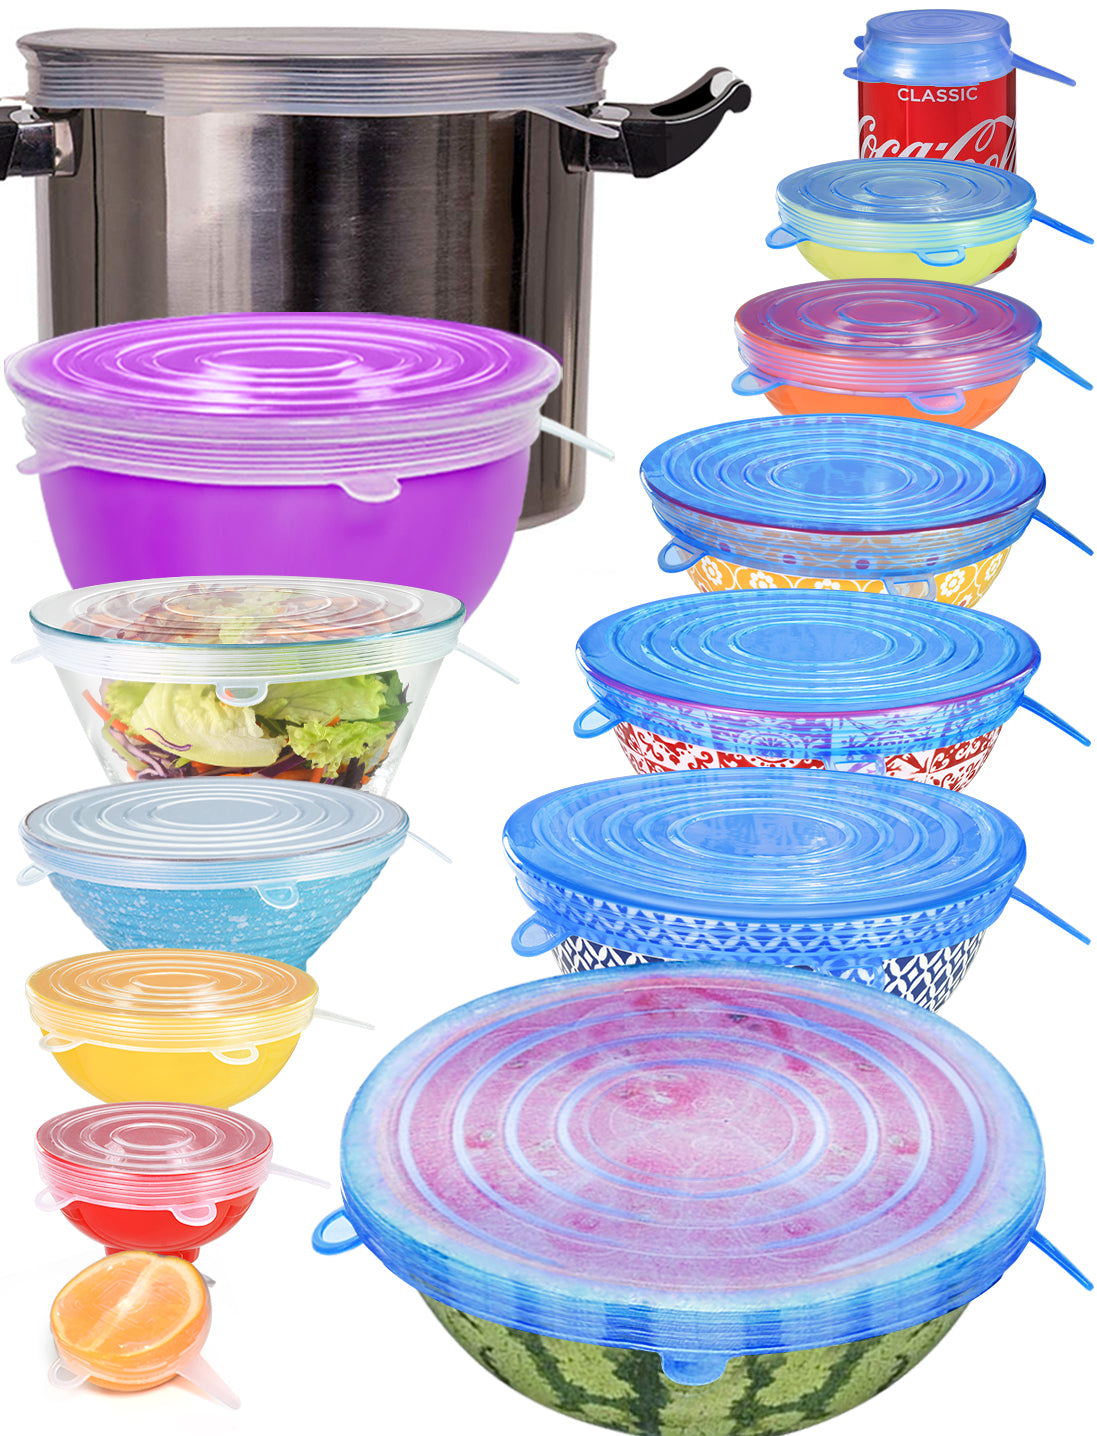 Cookware Lids & Containers